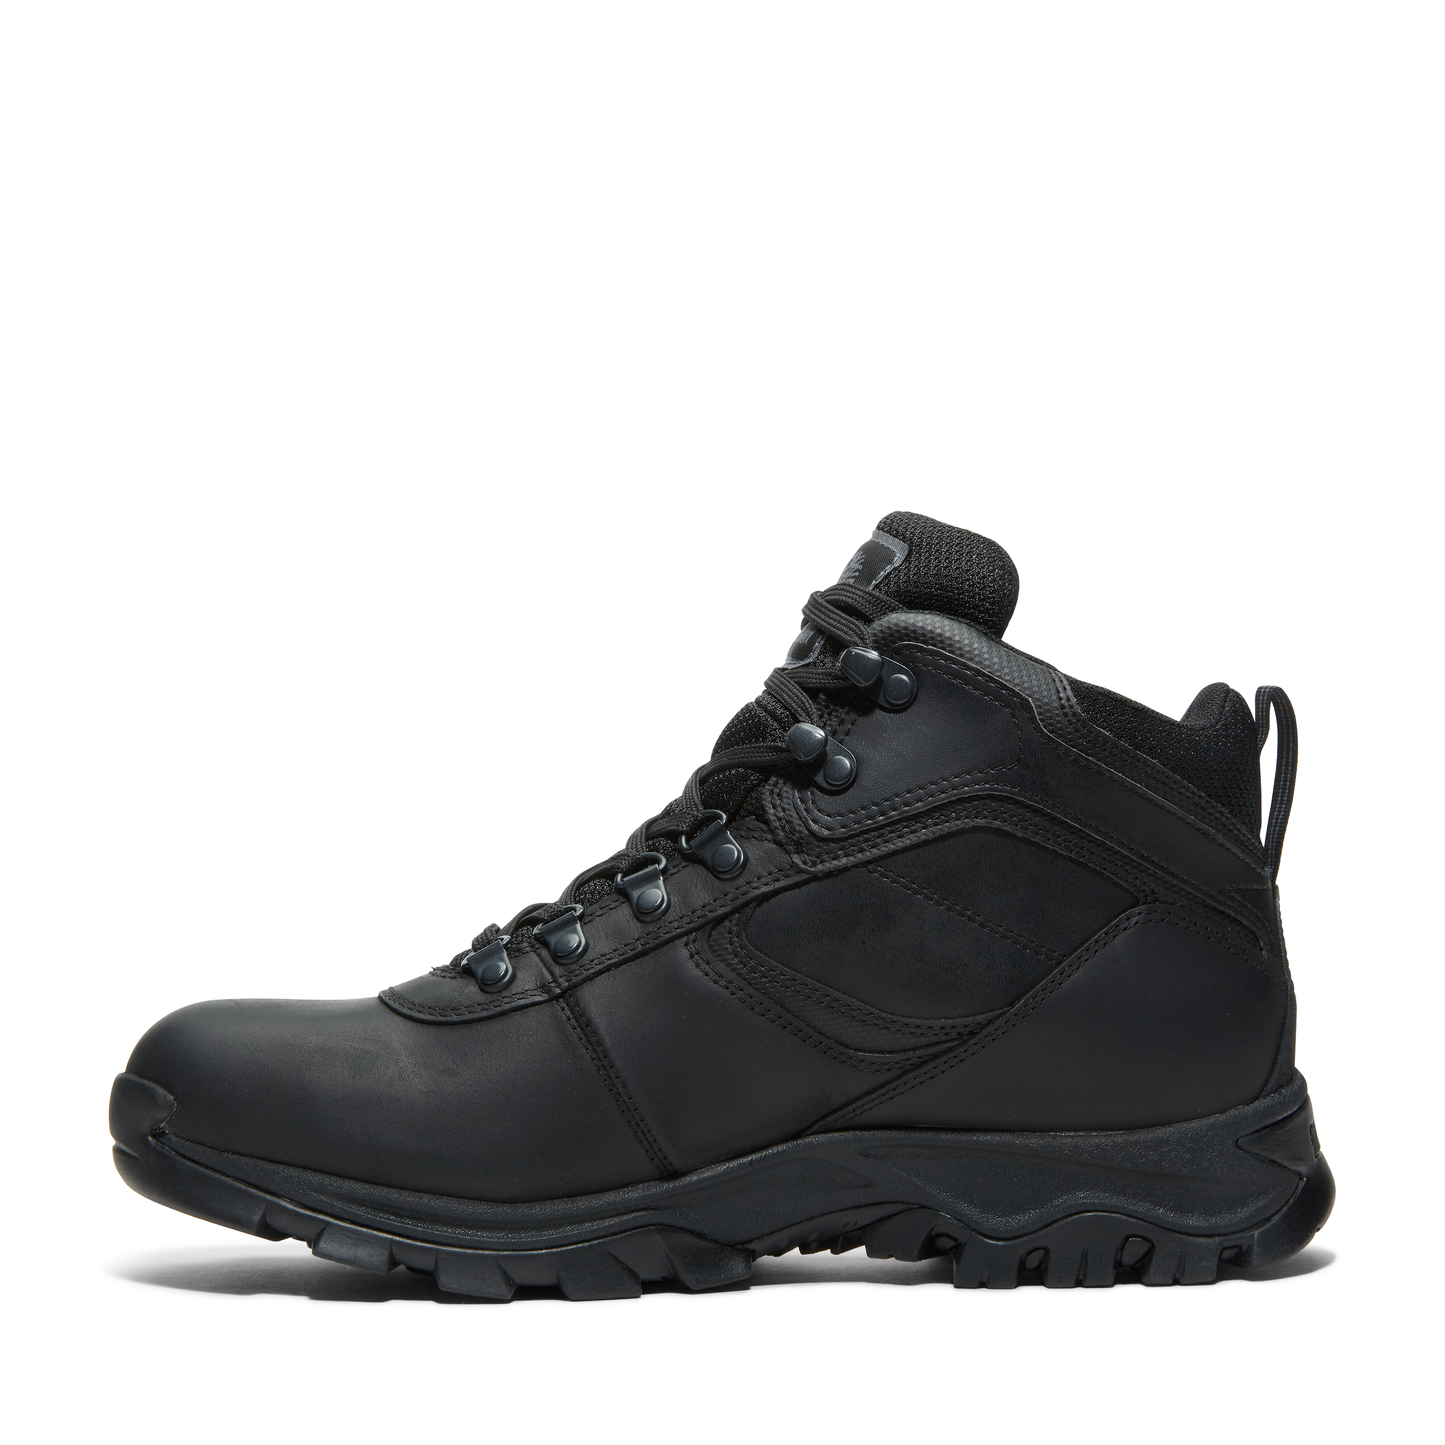 Bota Timberland MT Maddsen Impermeable Negra | Outdoor Adventure Colom…